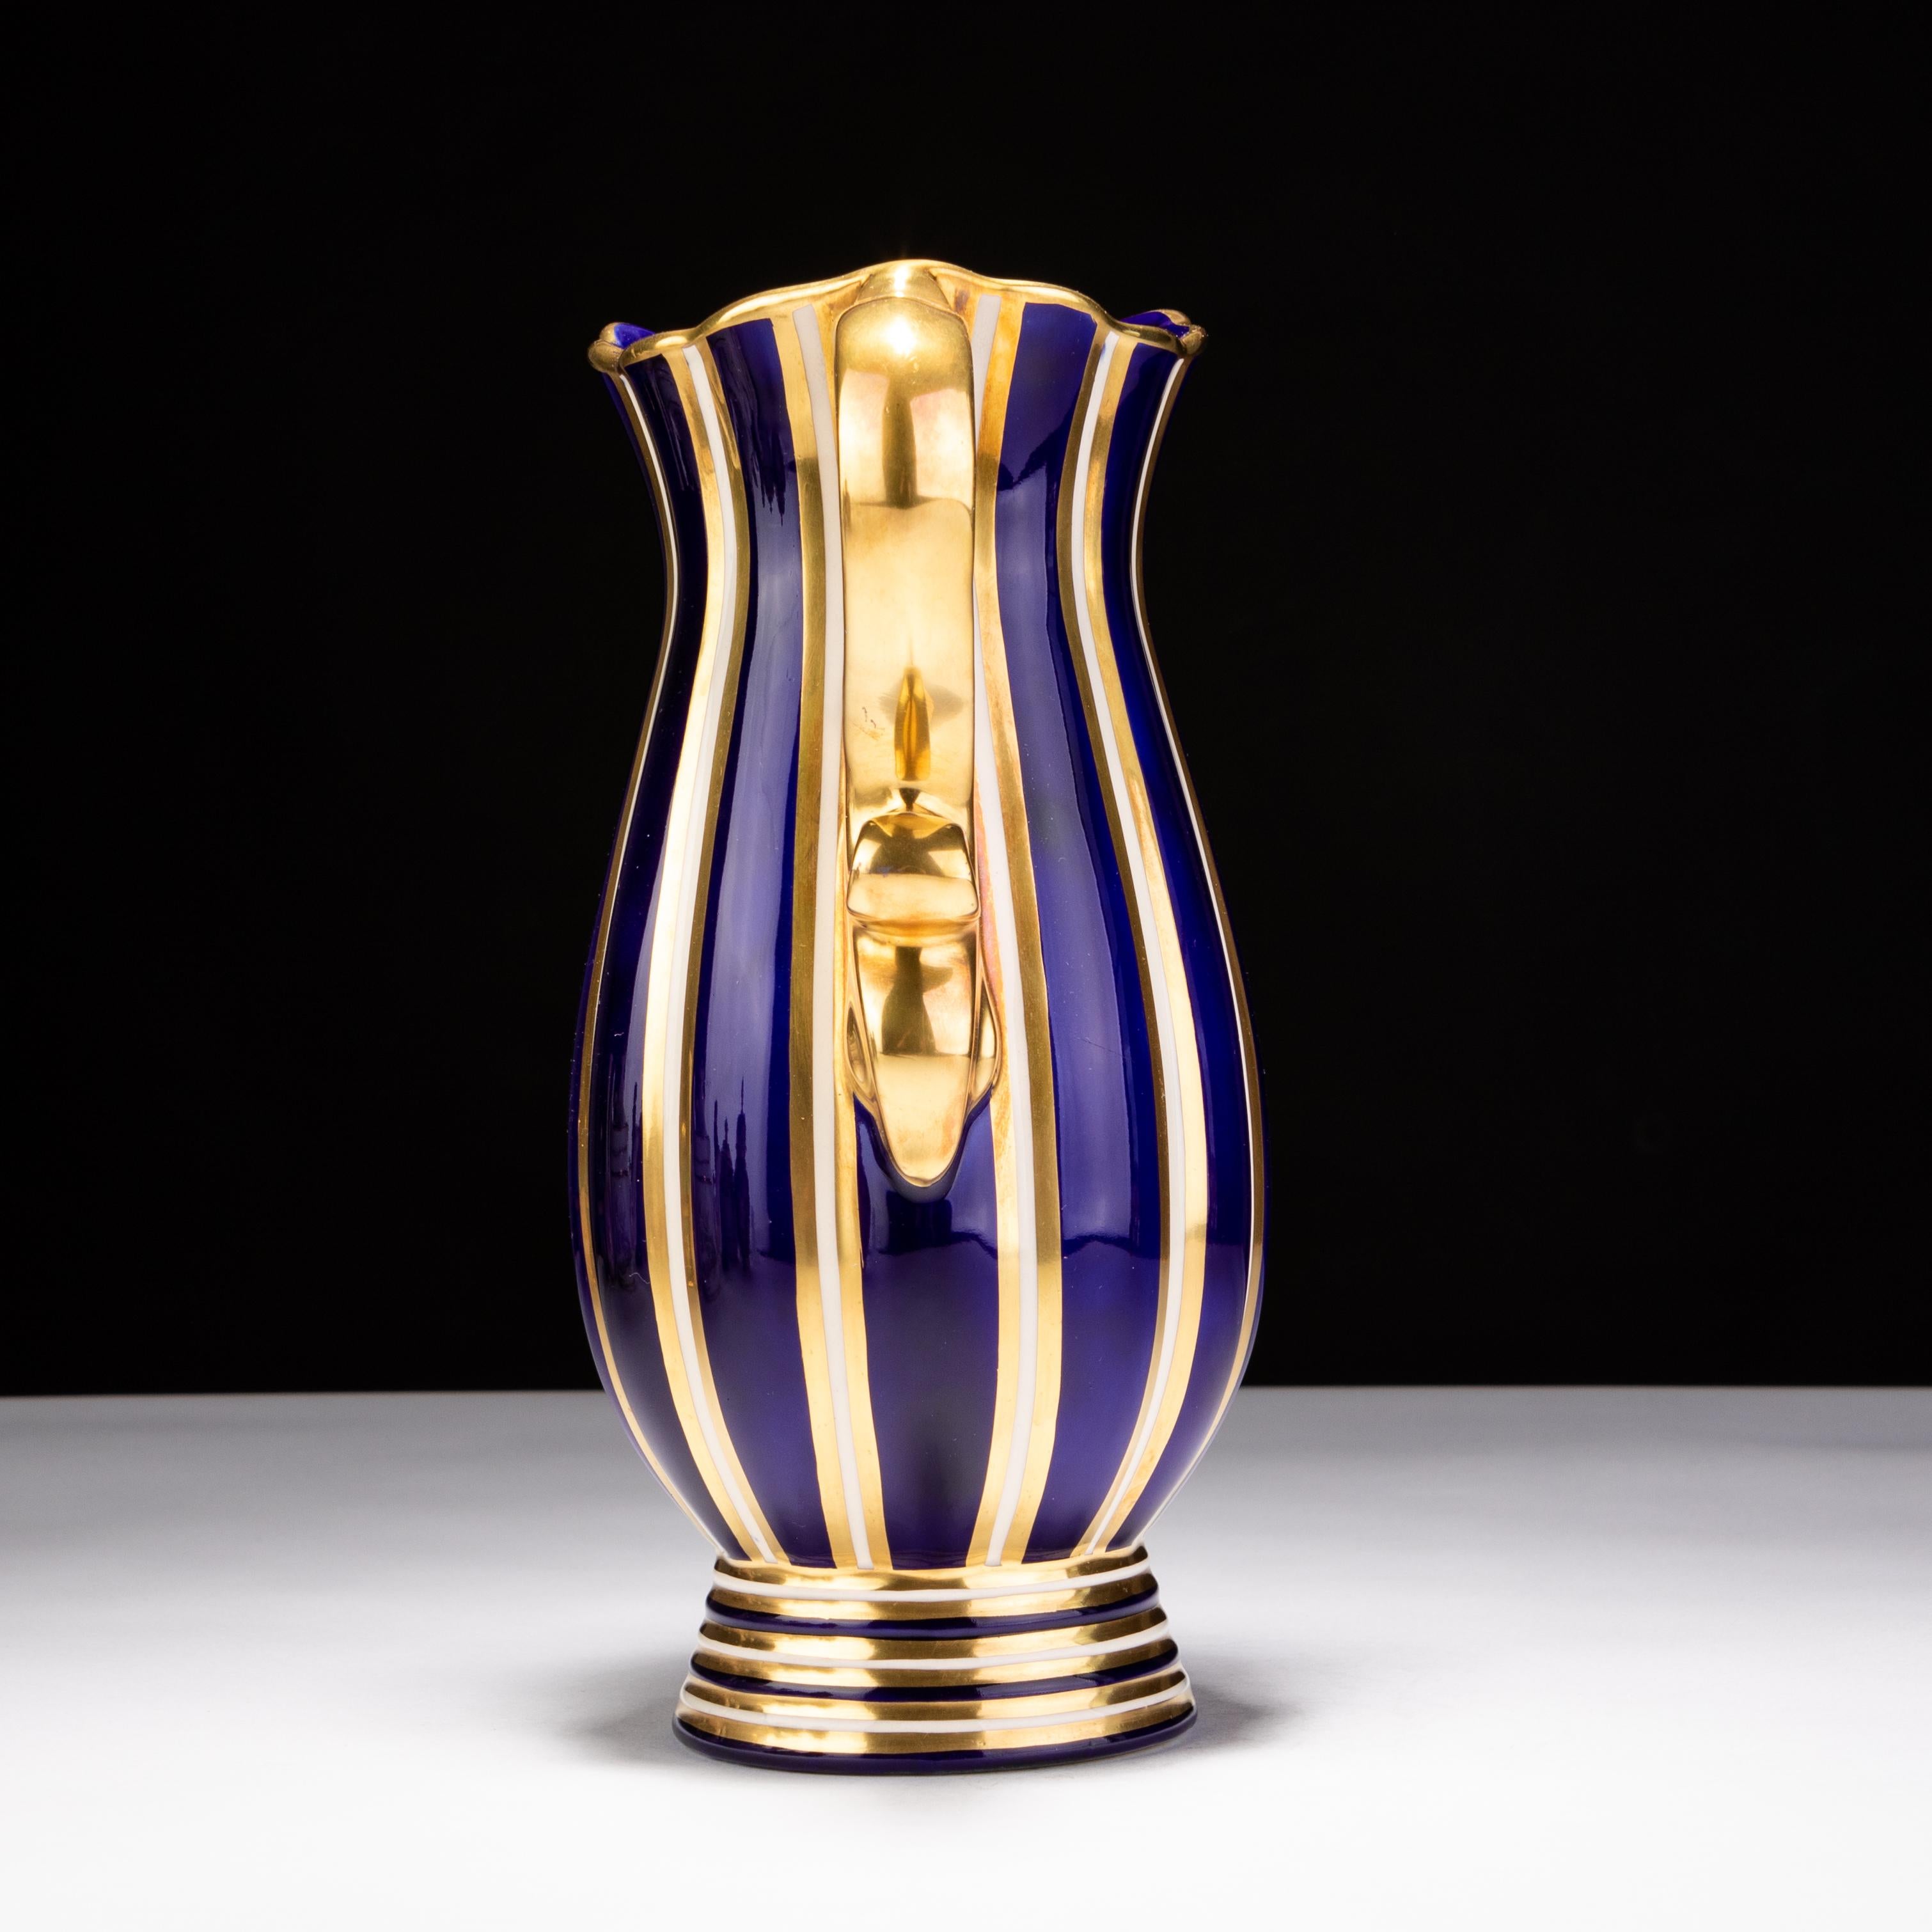 Wade Empress Cobalt 24KT Gold Porcelain Pitcher Jug, marked on base.
Very good condition
From a private collection
Free international shipping